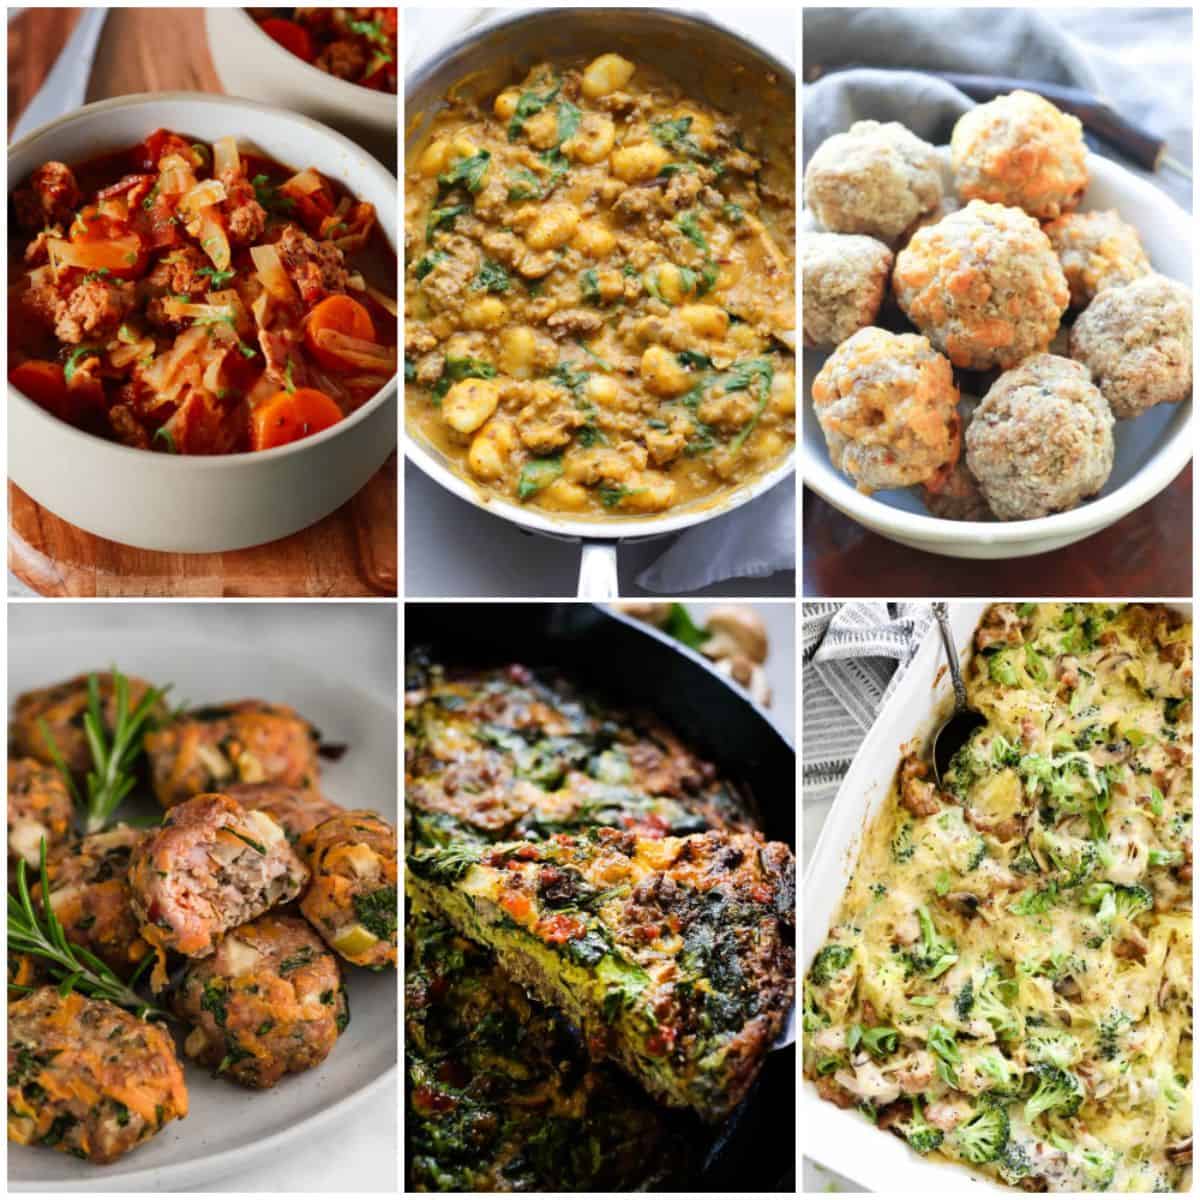 21 Easy Ground Sausage Recipes To Make For Hearty Meals - Cook Eat Well